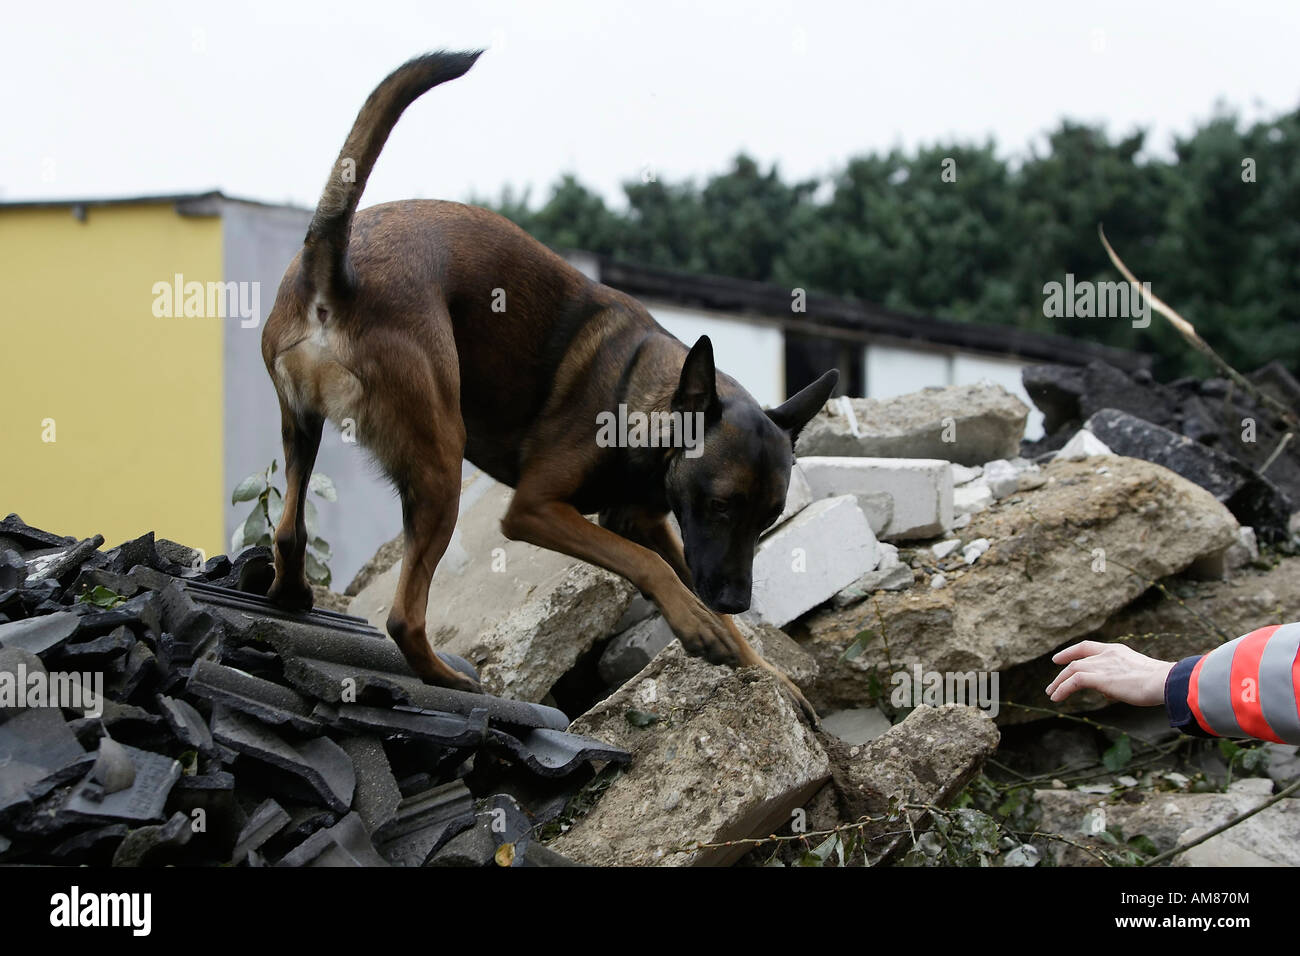 Search and rescue dog on a heap of rubble, Diepeschrather Weg, Bergisch Gladbach, North Rhine-Westphalia, Germany Stock Photo